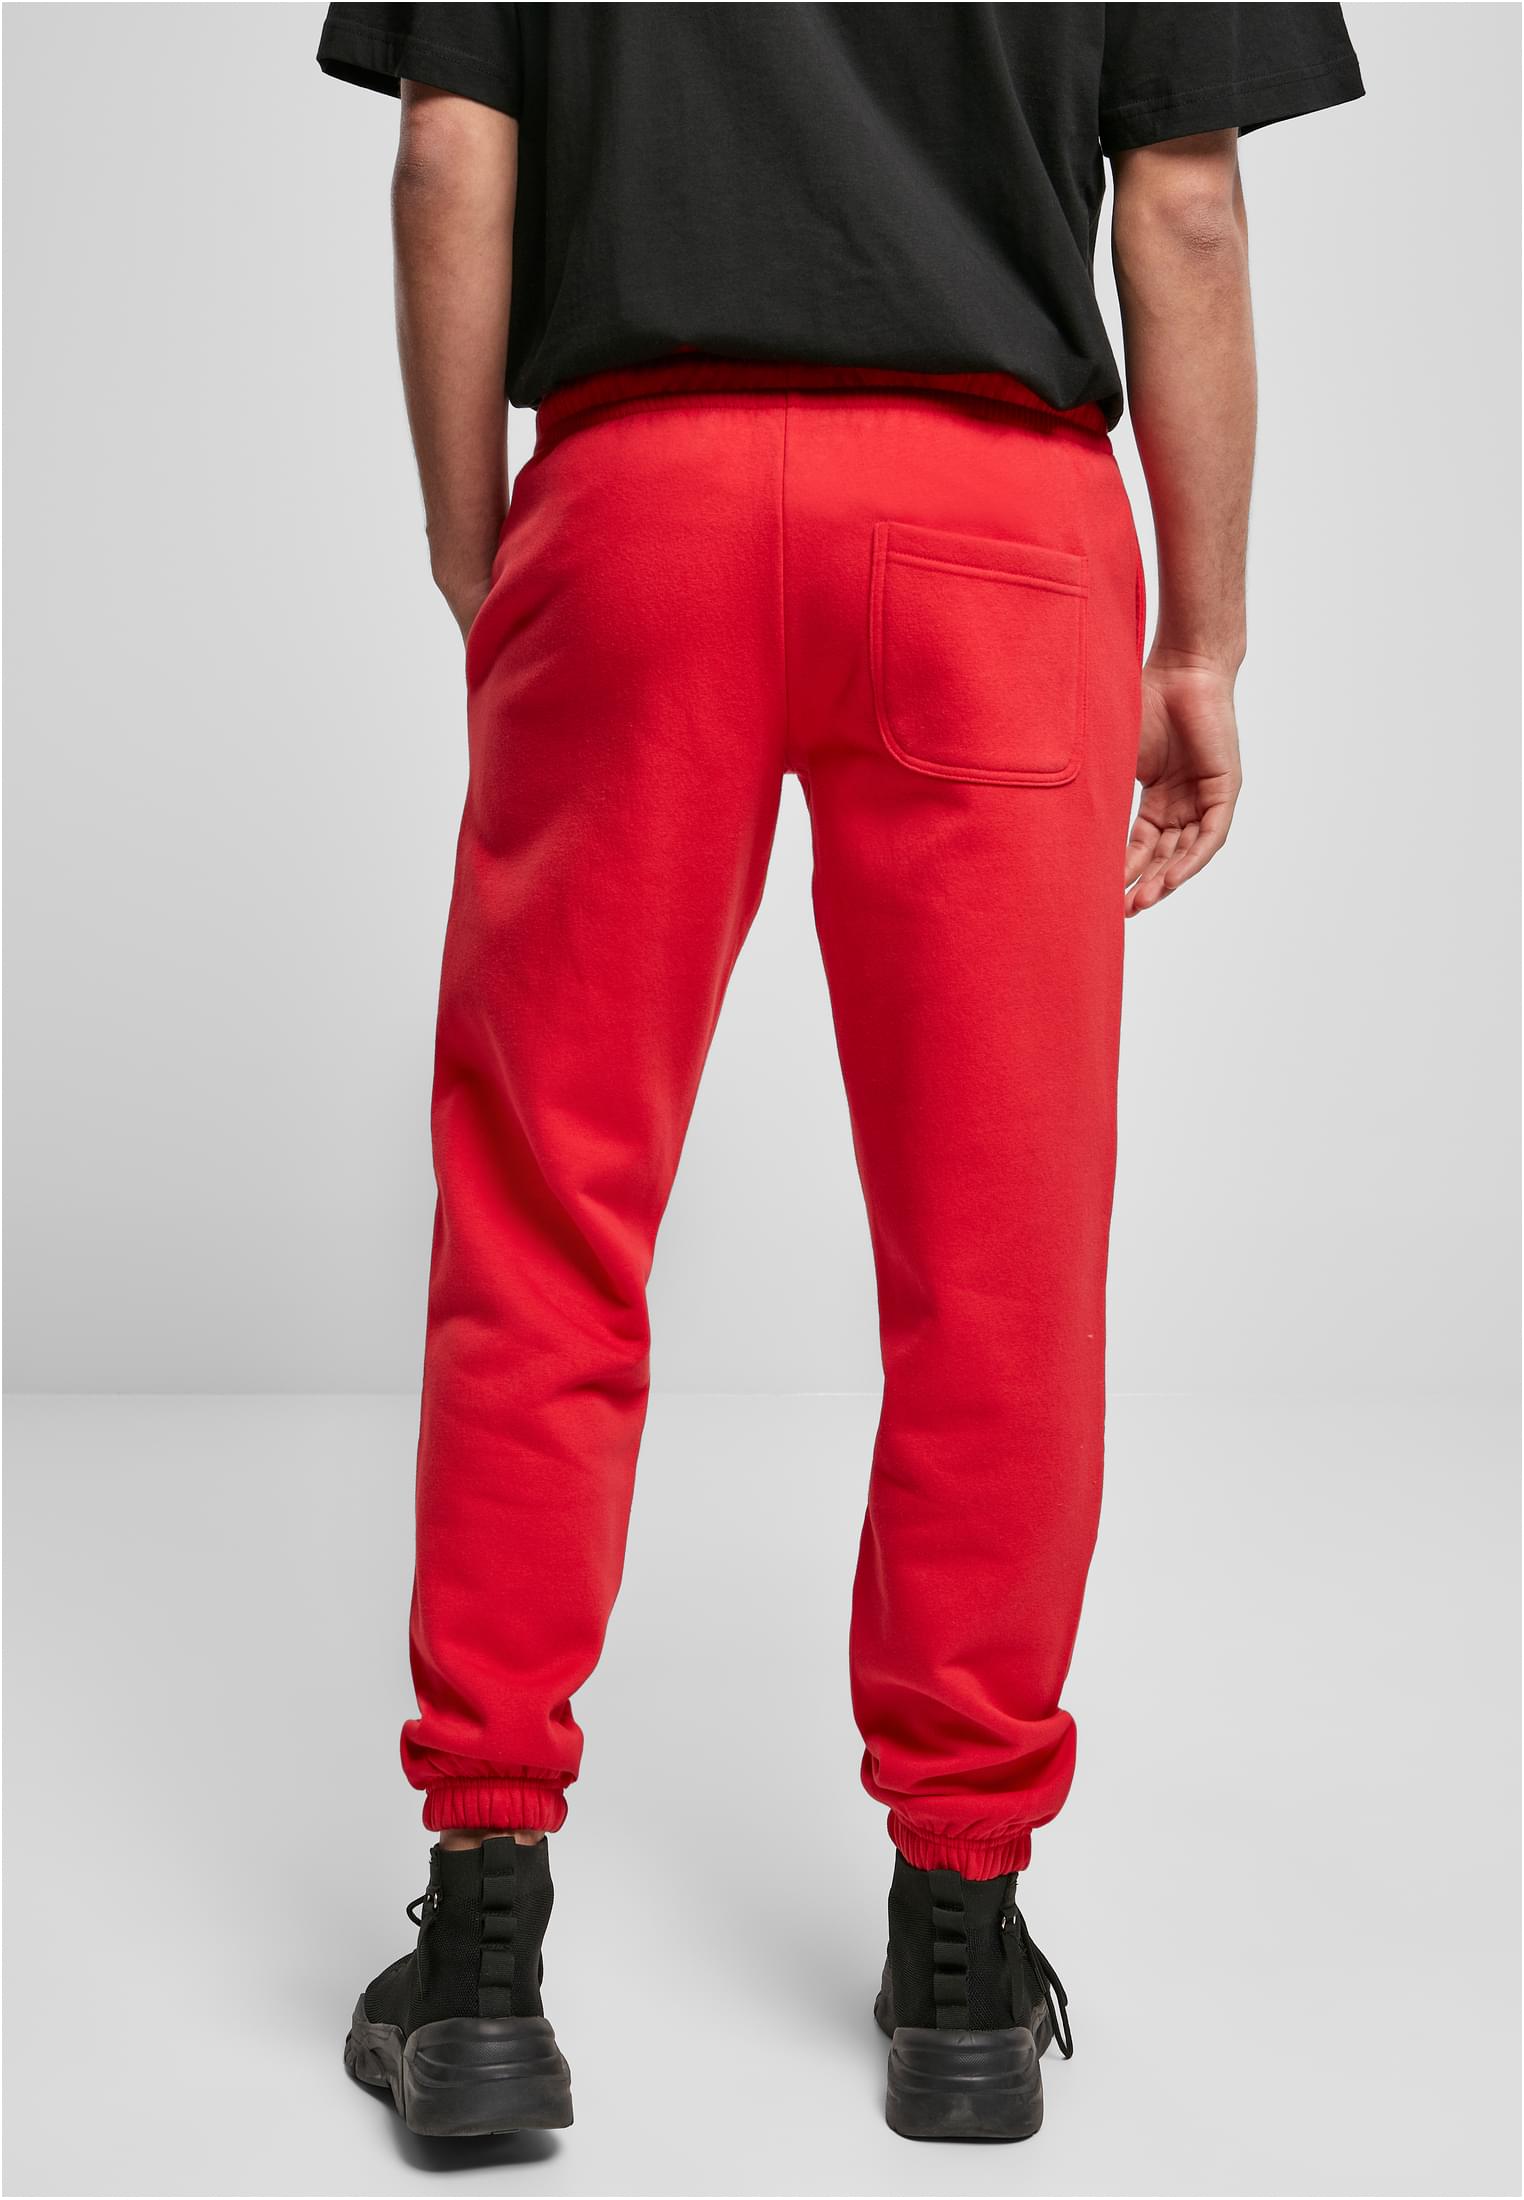 Sweatpants Basic Sweatpants 2.0 in Farbe city red